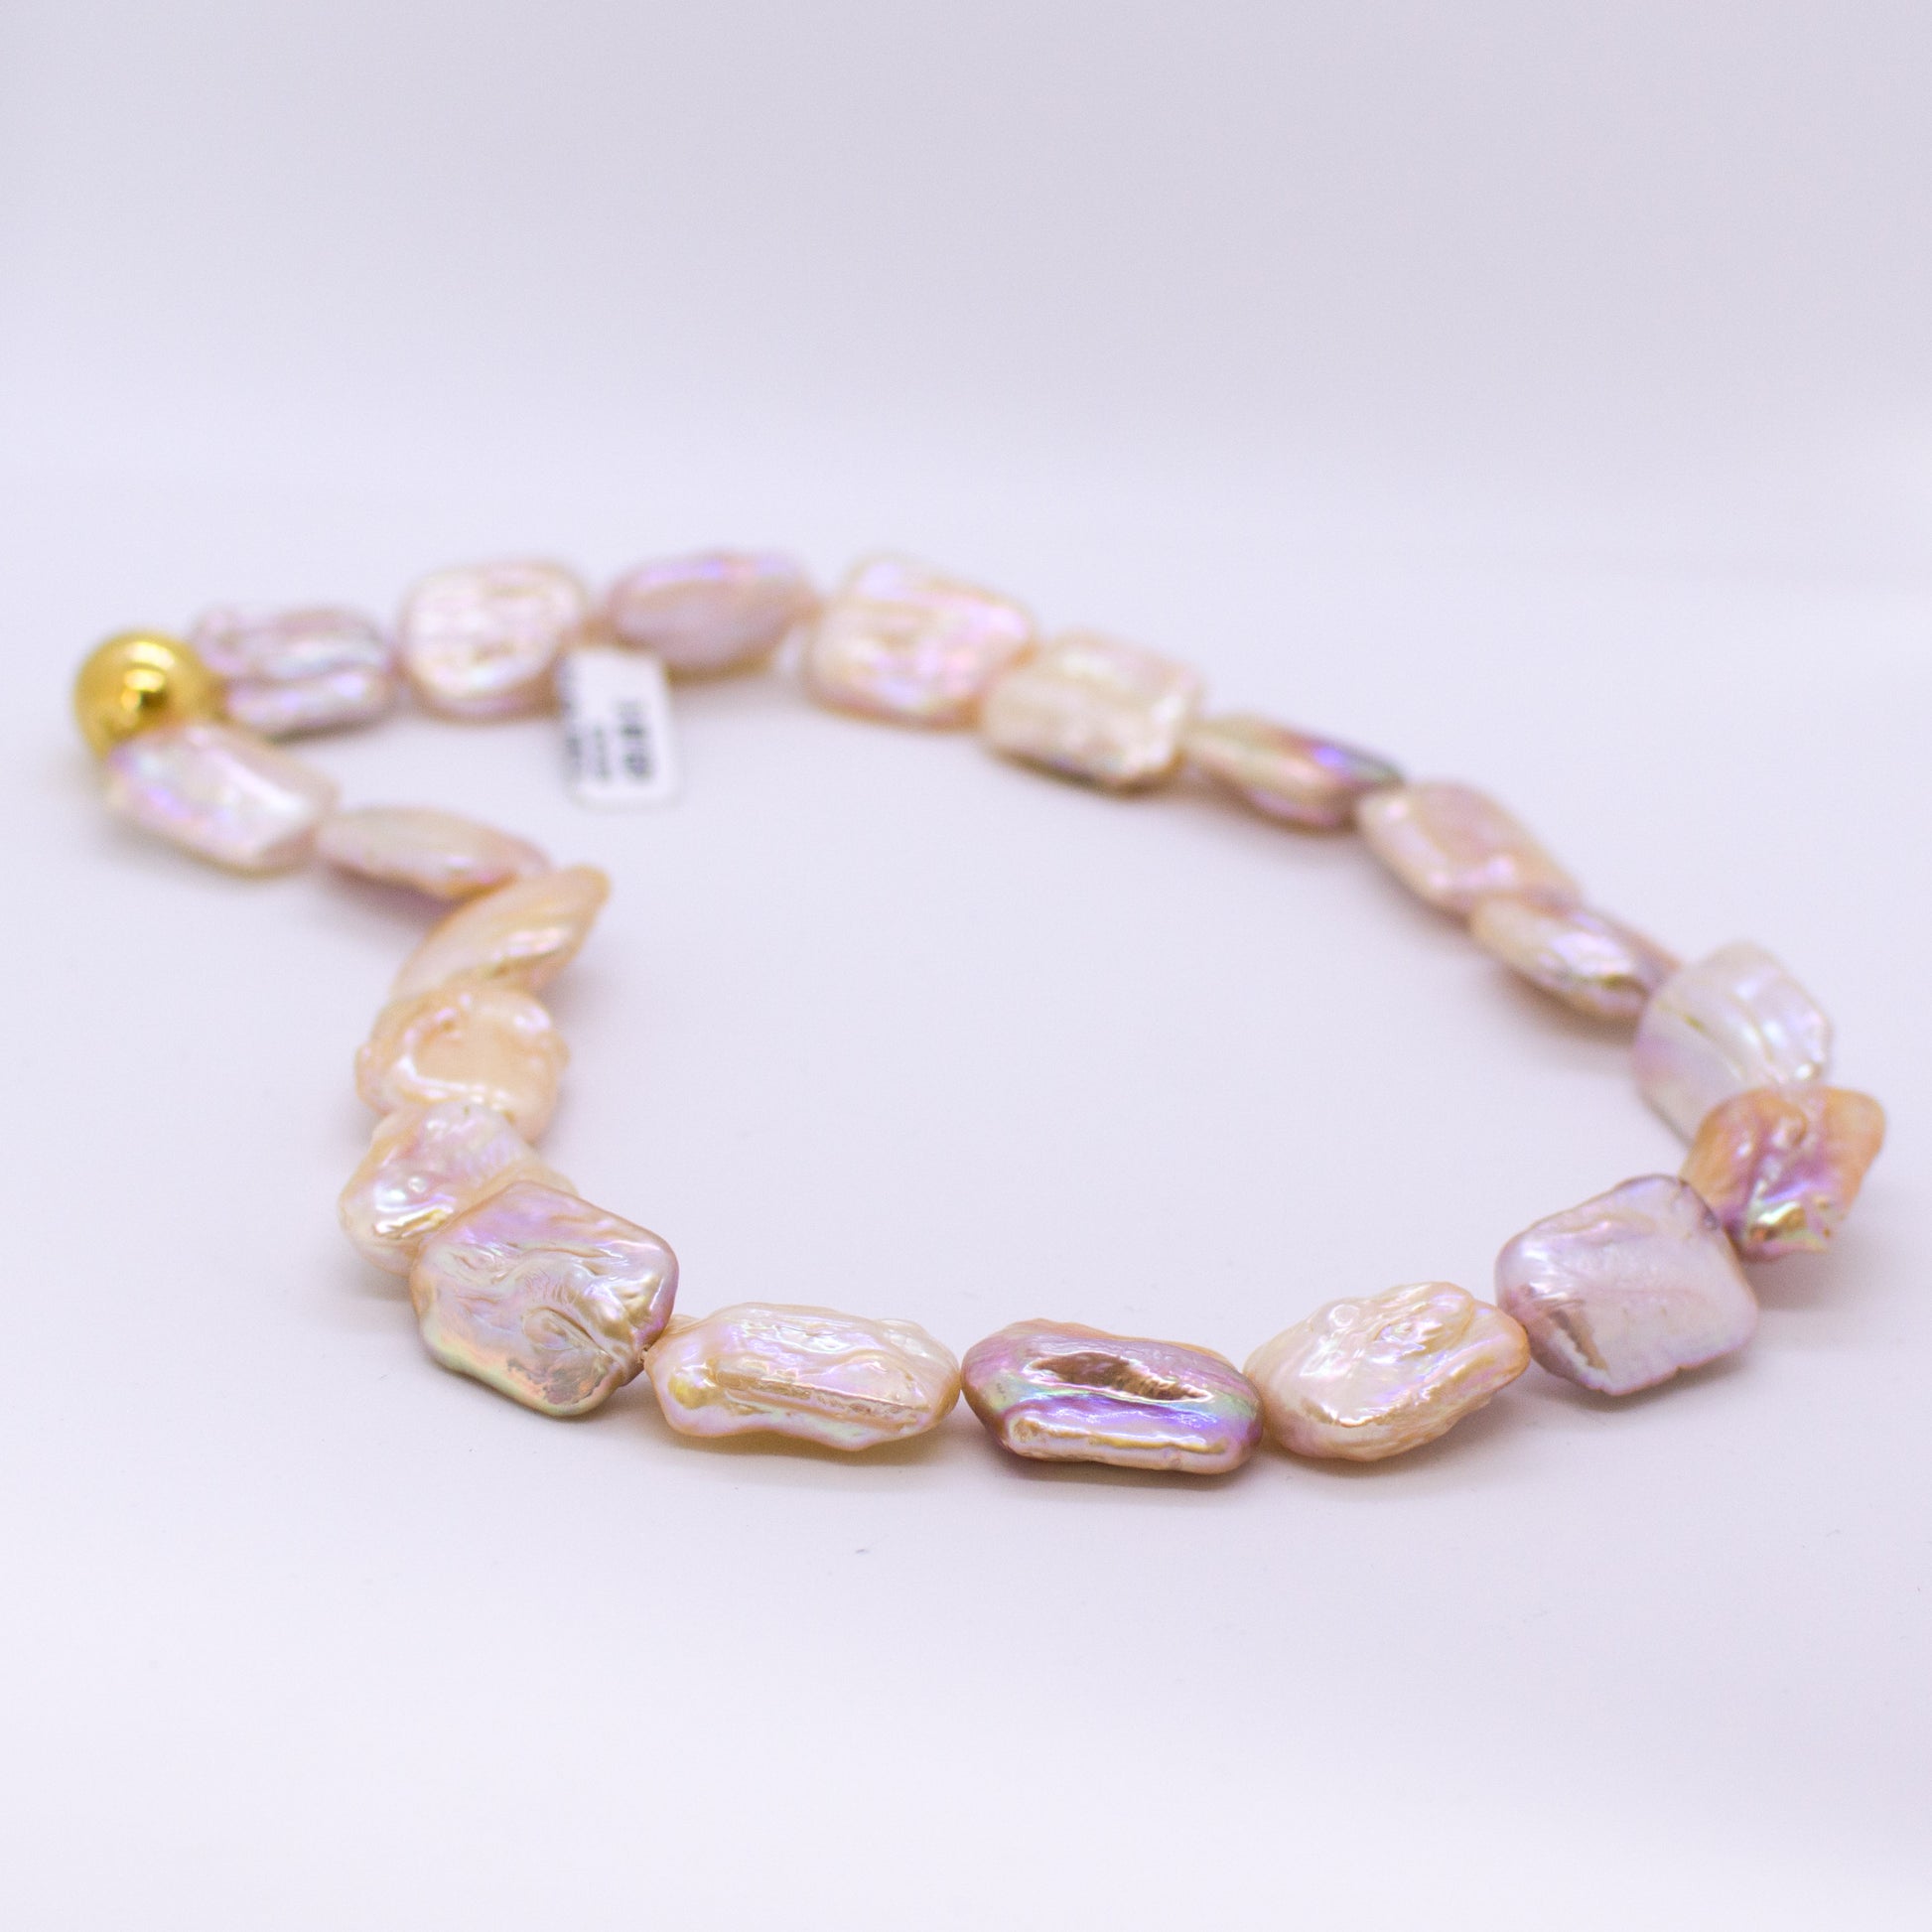 Baroque Cultured Freshwater Pearl Necklace - John Ross Jewellers